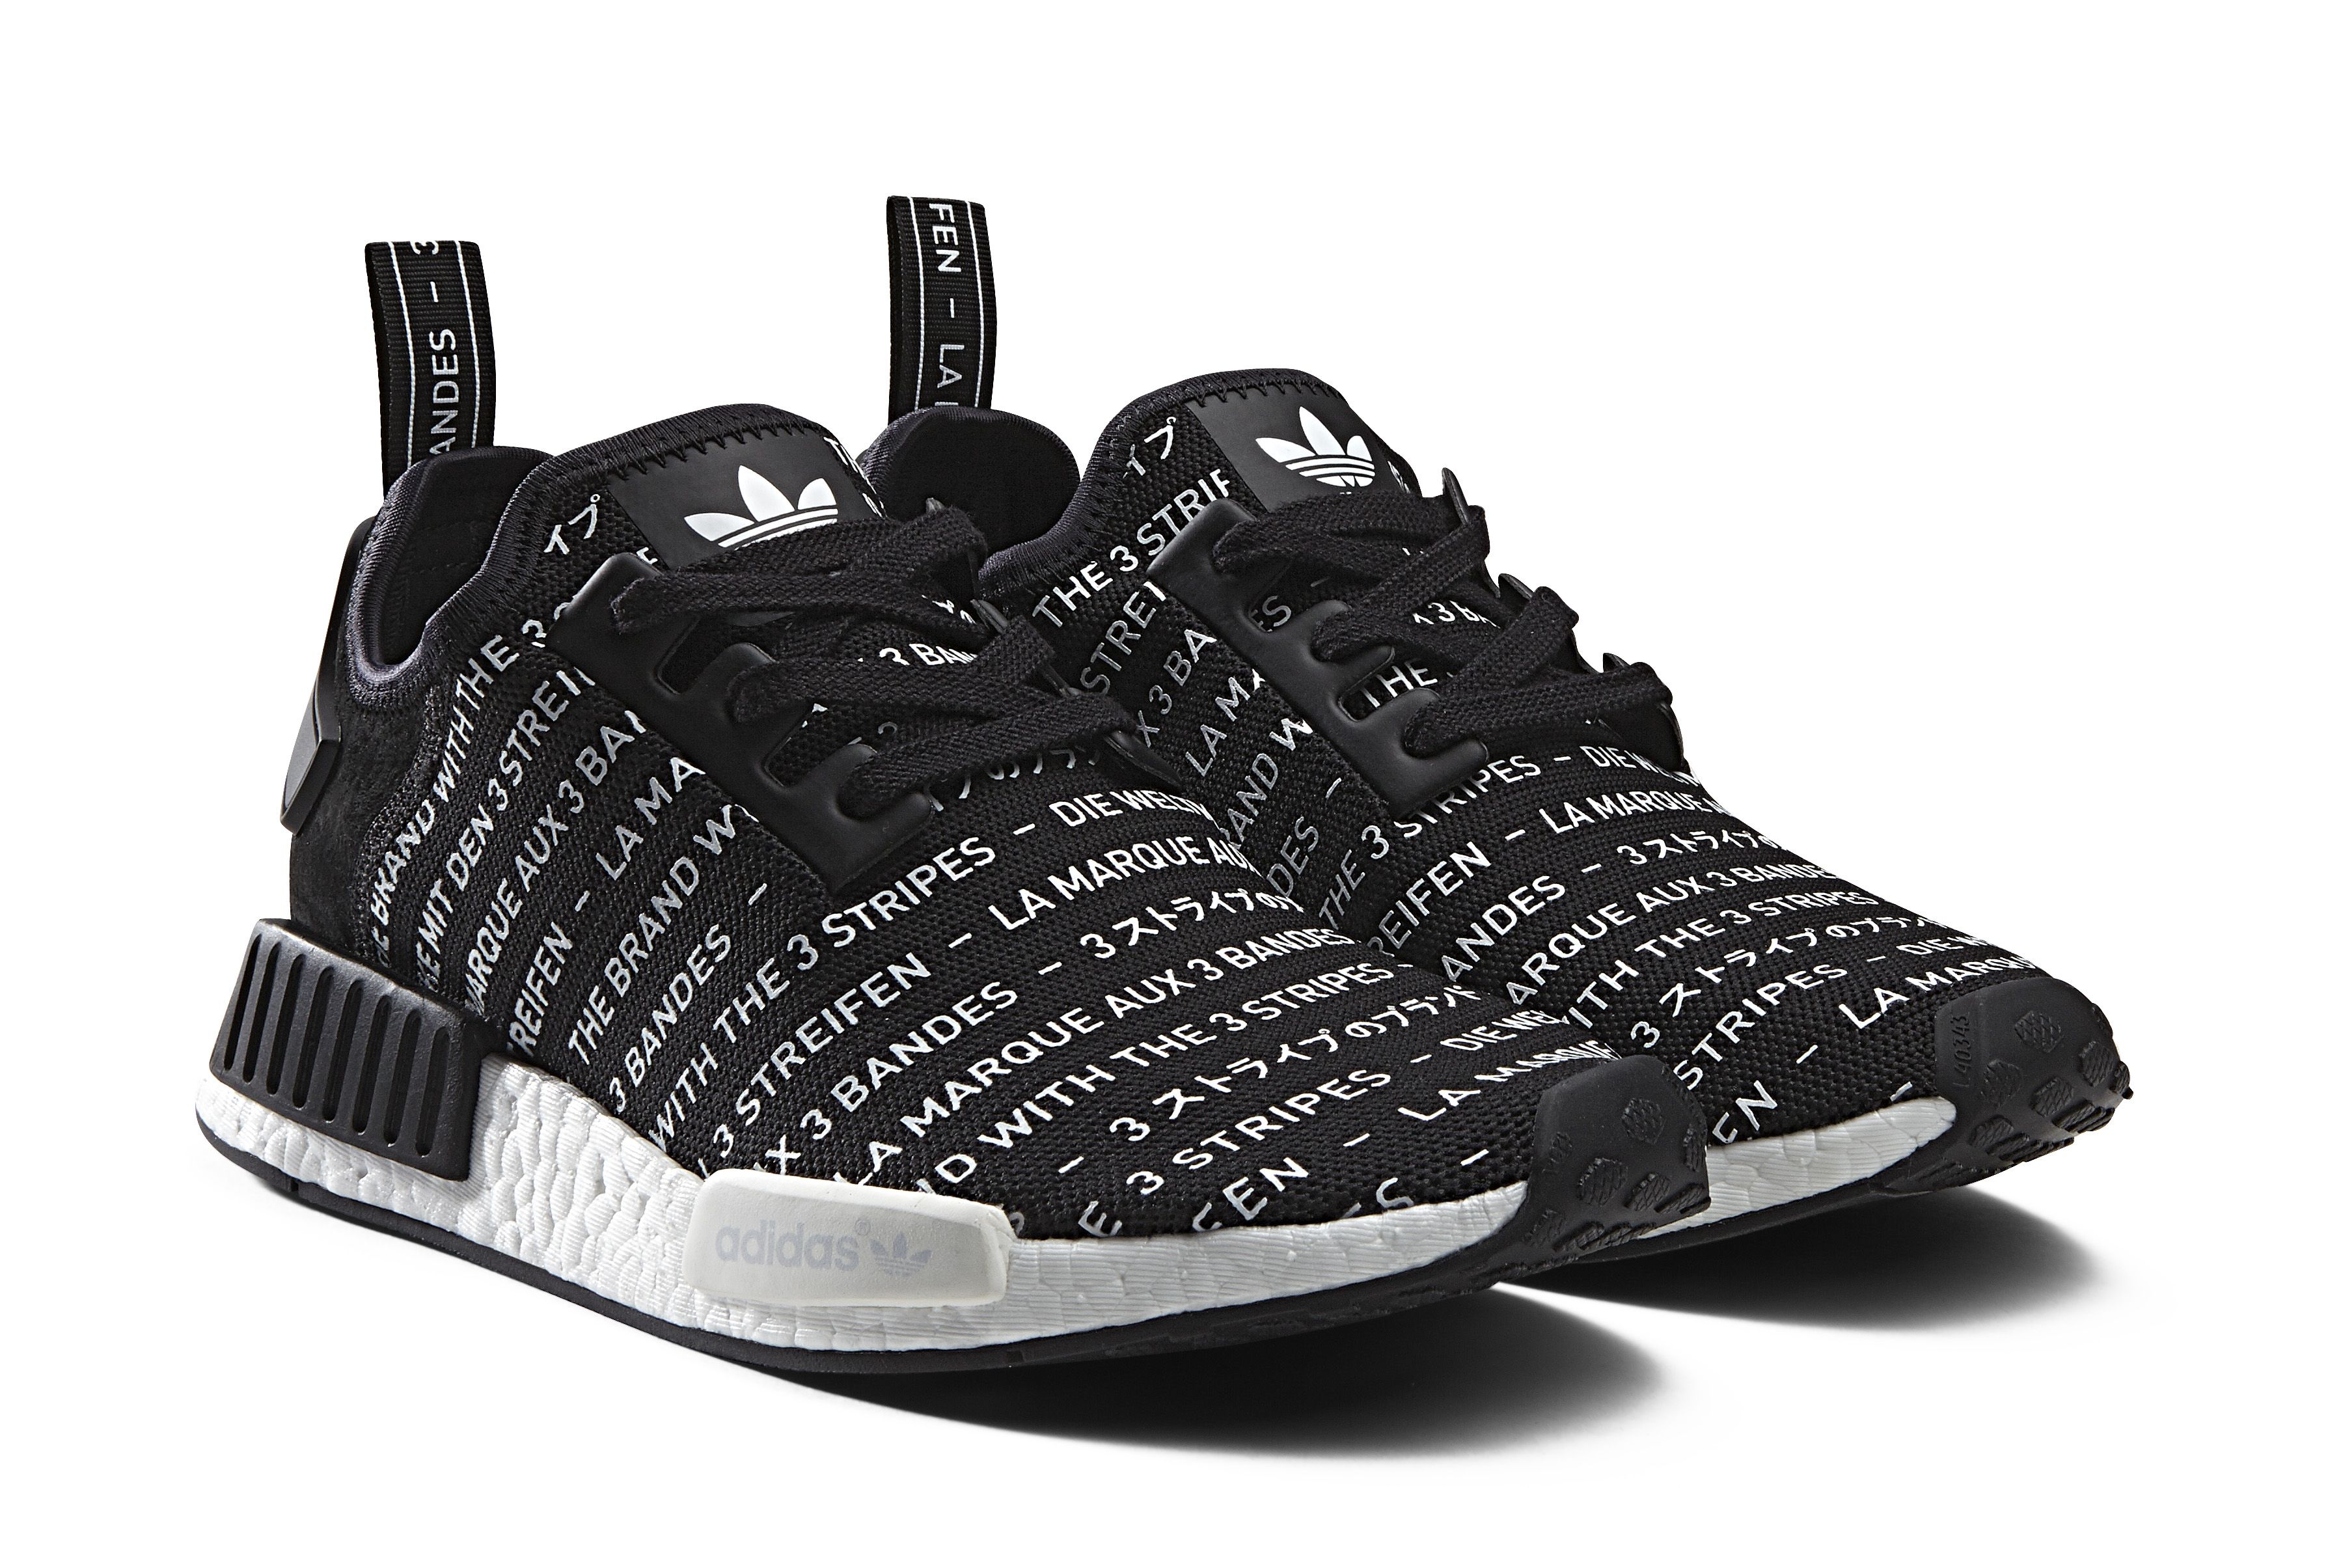 cool nmd shoes